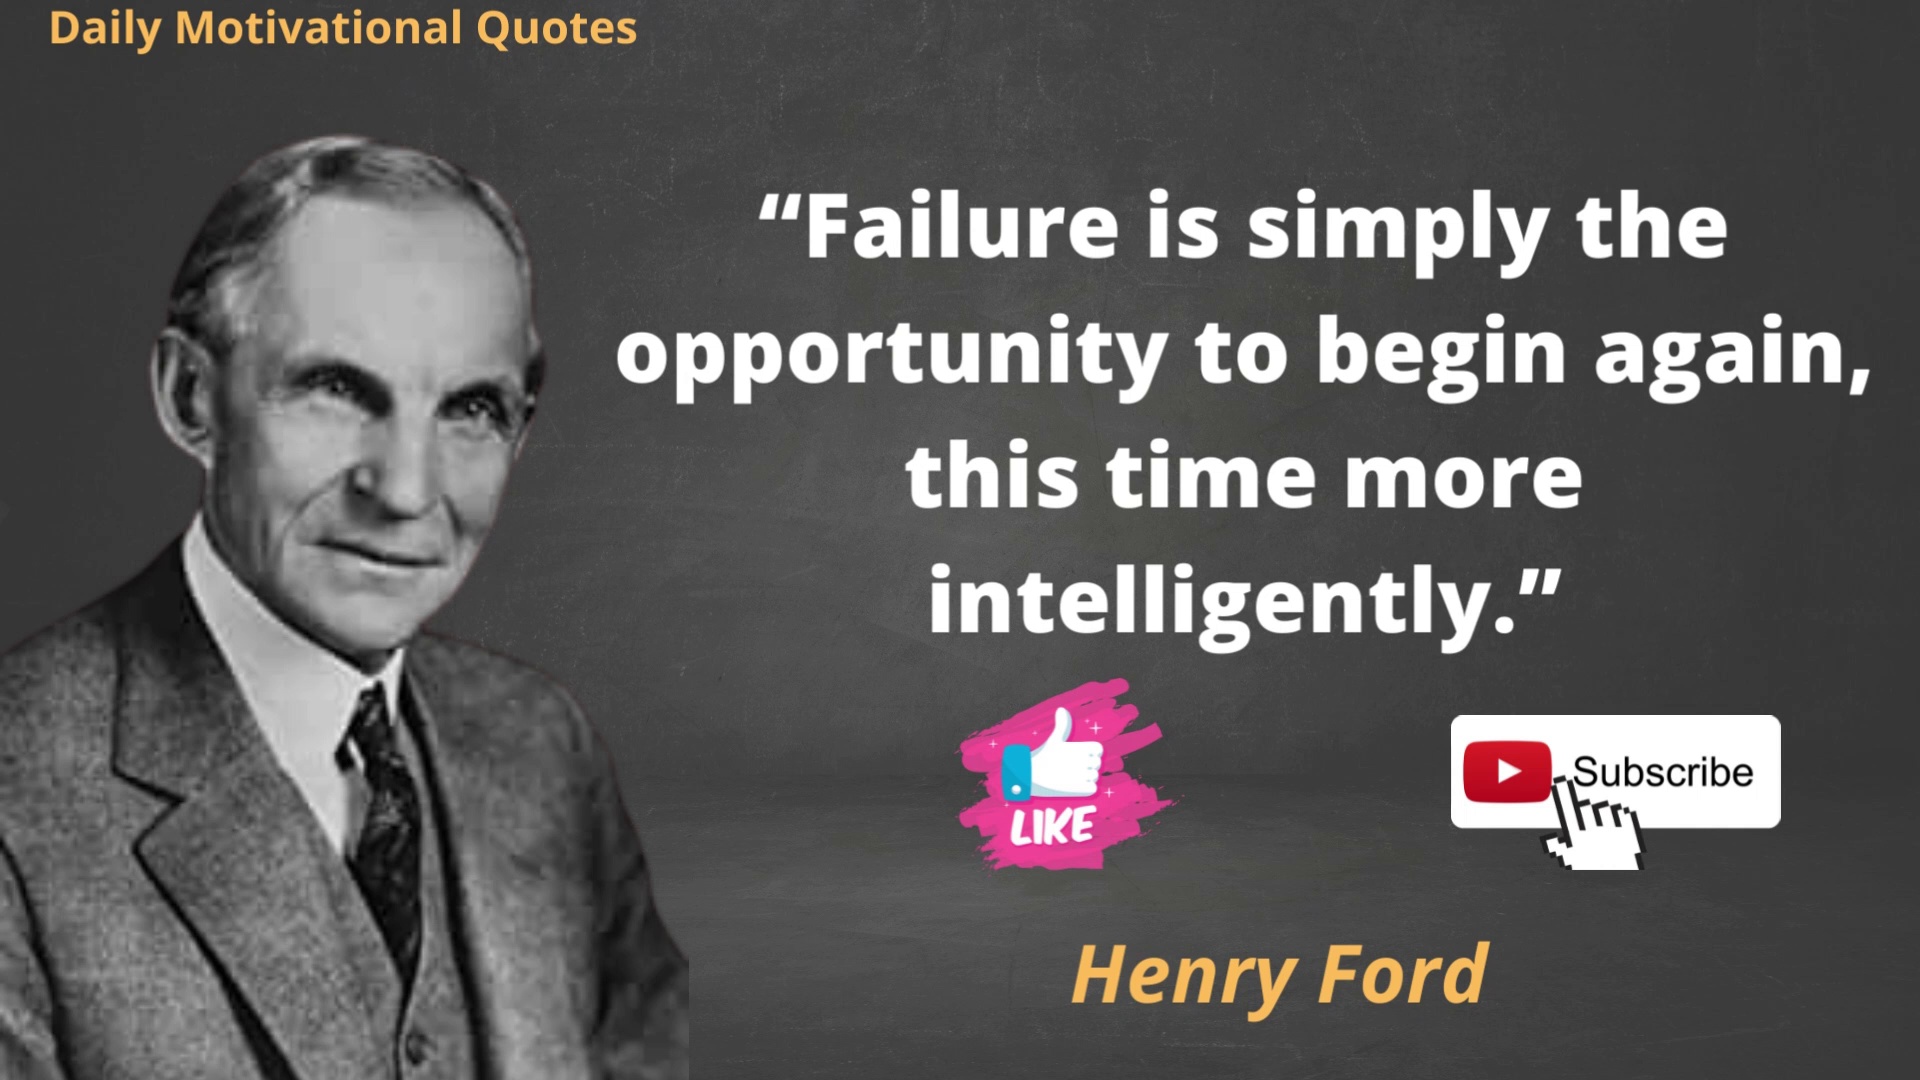 Henry Ford famous quotes about life & success – inspirational quotes